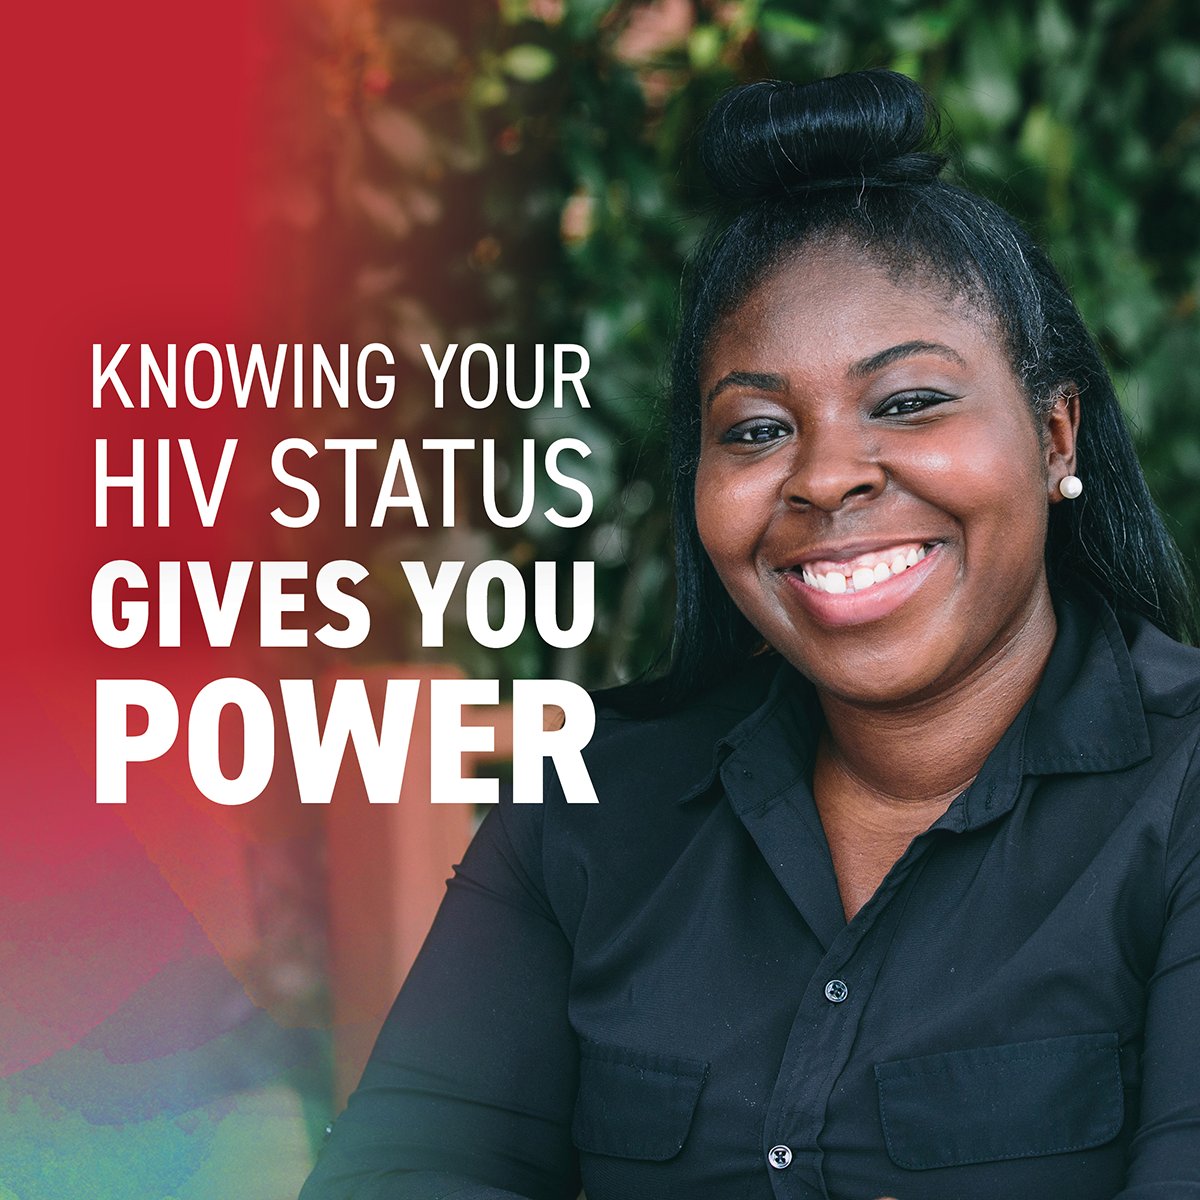 Take charge of your health on June 27, National HIV Testing Day! Learn about all of your #HIVTesting options, inc rapid #HIV self tests: townspeople.org/resources/hiva… 

#TownspeopleSD #Townspeople_SD #SanDiego #StopHIVTogether #TransHealth #NHTD #PrideMonth